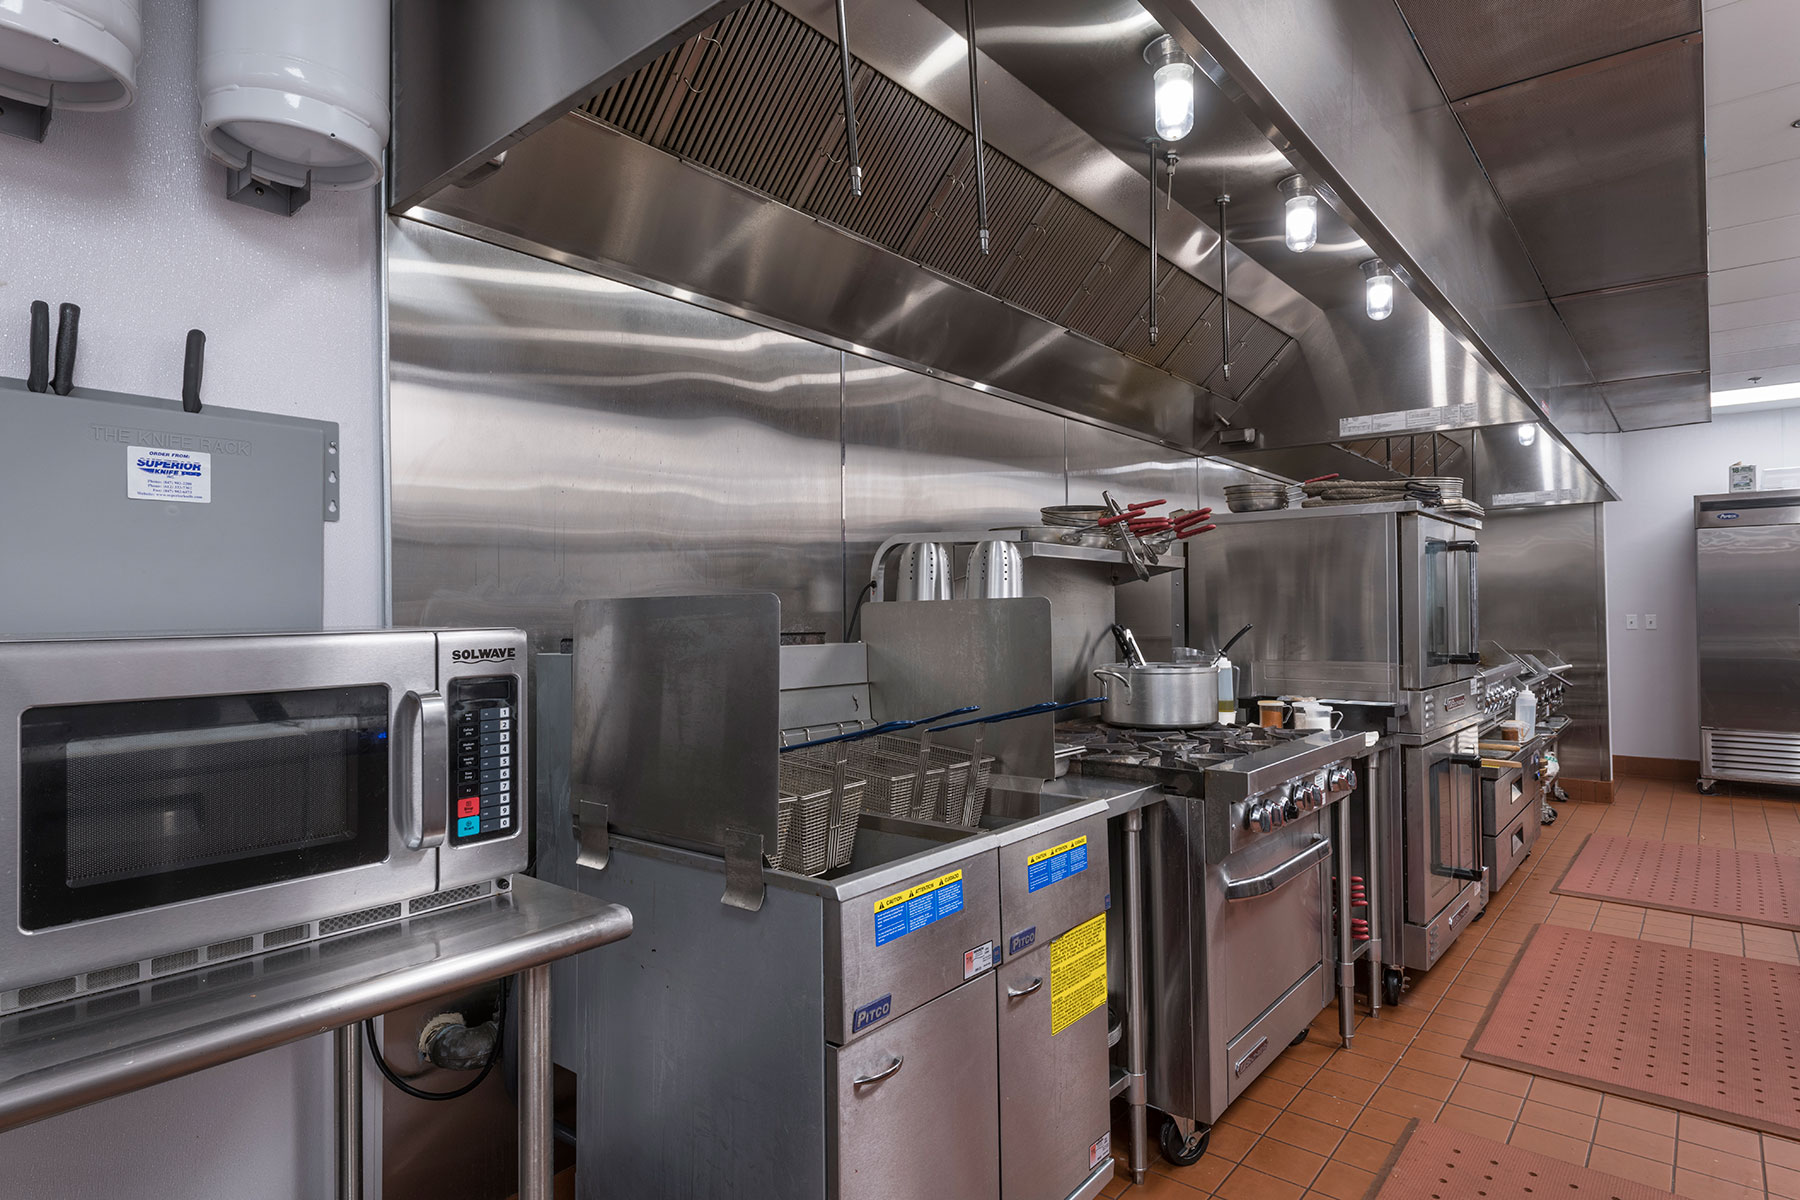 Commercial fryer commercial stove commercial oven - Four Seasons Steak & Grill Restaurant, Addison Custom Home. America's Custom Home Builders: New Construction, Remodeling, Restoration Services. Residential and Commercial.